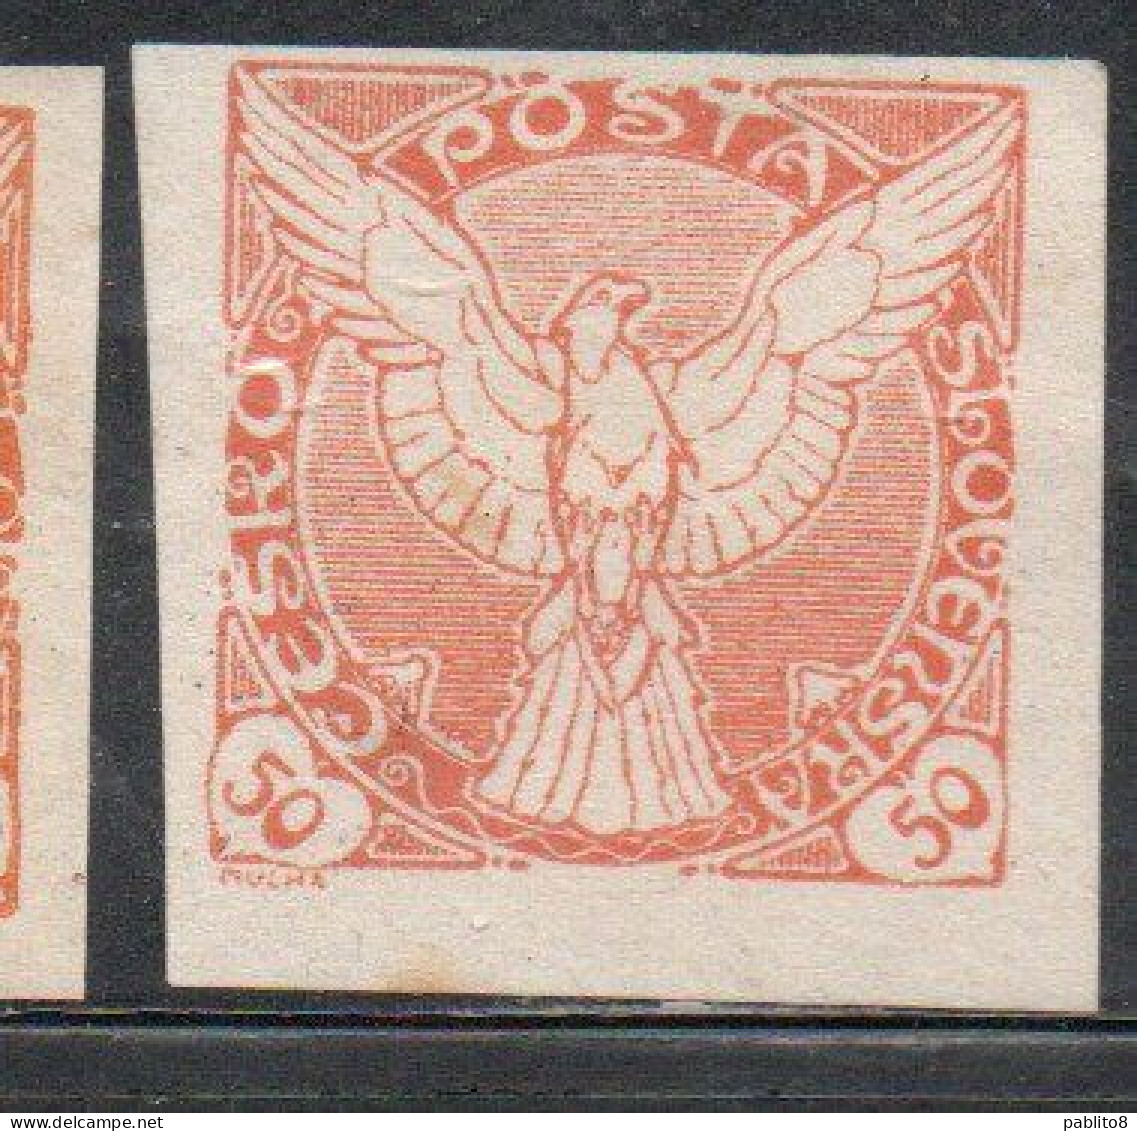 CZECHOSLOVAKIA CESKA CECOSLOVACCHIA 1918 1920 IMPERF. NEWSPAPER STAMPS WINDHOVER 50h MH - Timbres Pour Journaux